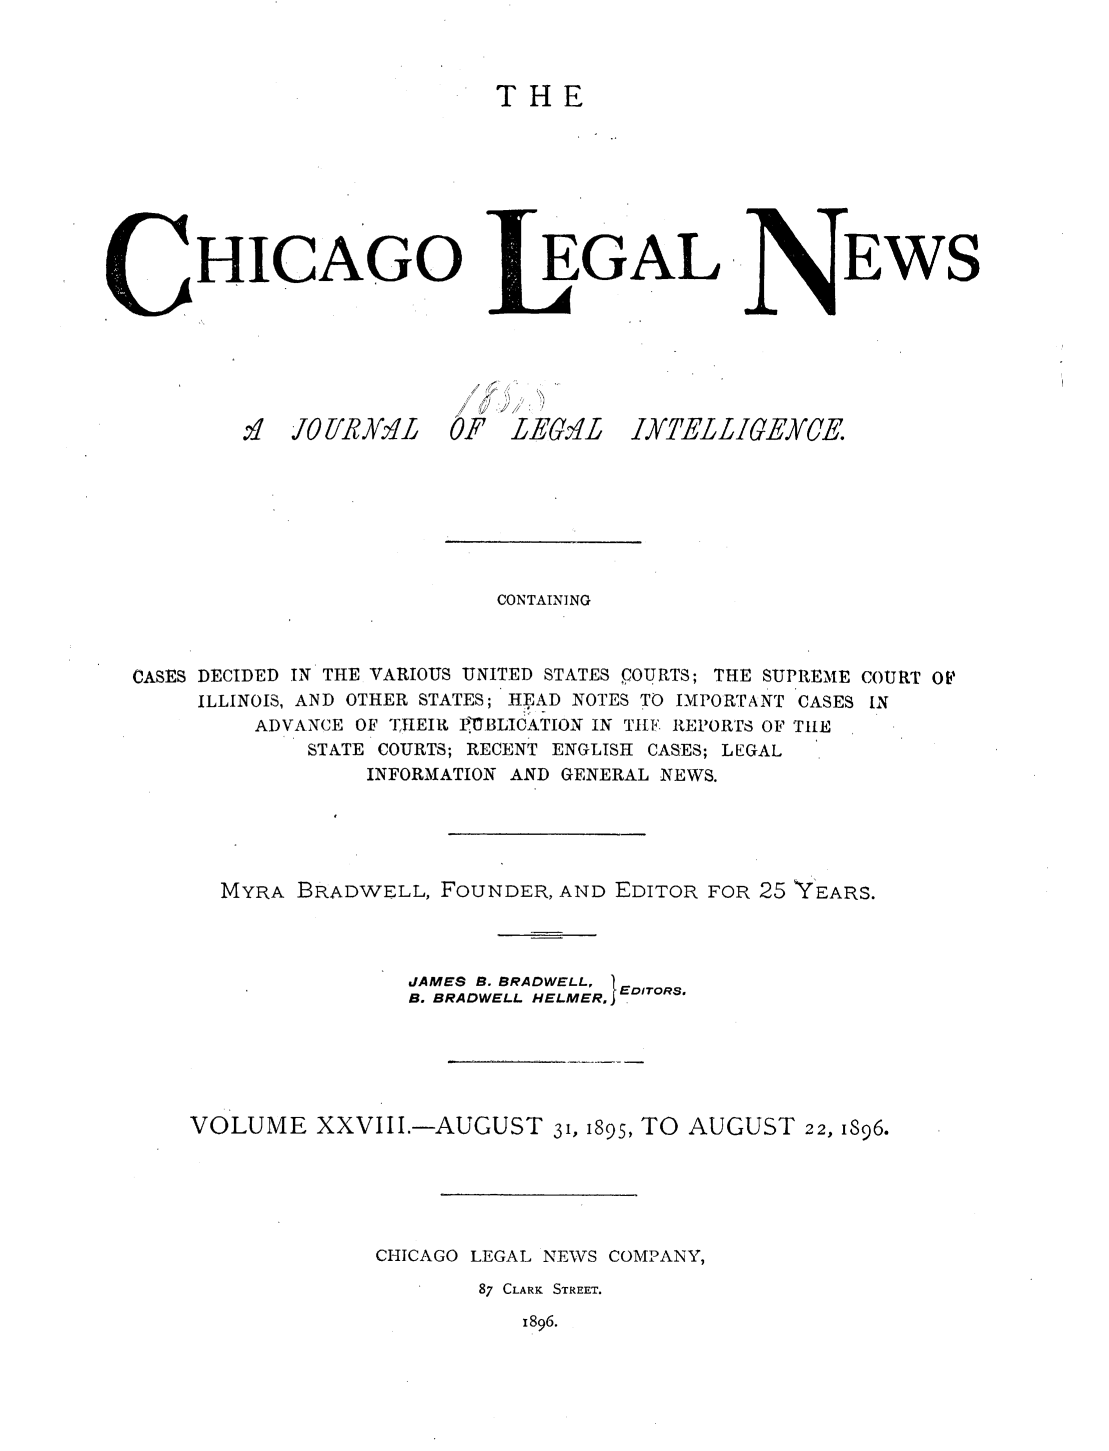 handle is hein.journals/chiclene28 and id is 1 raw text is: THEHICAGO.IO lIRIJ XIEGALOF LEGmiLEWSCONTAININGCASES DECIDED IN THE VARIOUS UNITED STATES COURTS; THE SUPREME COURT OFILLINOIS, AND OTHER STATES; HEAD NOTES TO IMPORTANT CASES INADVANCE OF 'THEIRt PG-BLICATION IN TIE REPORTS OF TILESTATE COURTS; RECENT ENGLISH CASES; LEGALINFORMATION AND GENERAL NEWS.MYRA BRADWELL, FOUNDER, AND EDITOR FOR 25 YEARS.JAMES B. BRADWELL, EDiroRs.B. BRADWELL HELMER, EVOLUME XXVIII.-AUGUST 31, 1895, TO AUGUST 22, I896.CHICAGO LEGAL NEWS COMPANY,87 CLARK STREET.1896.IYEL L LIGEXCE